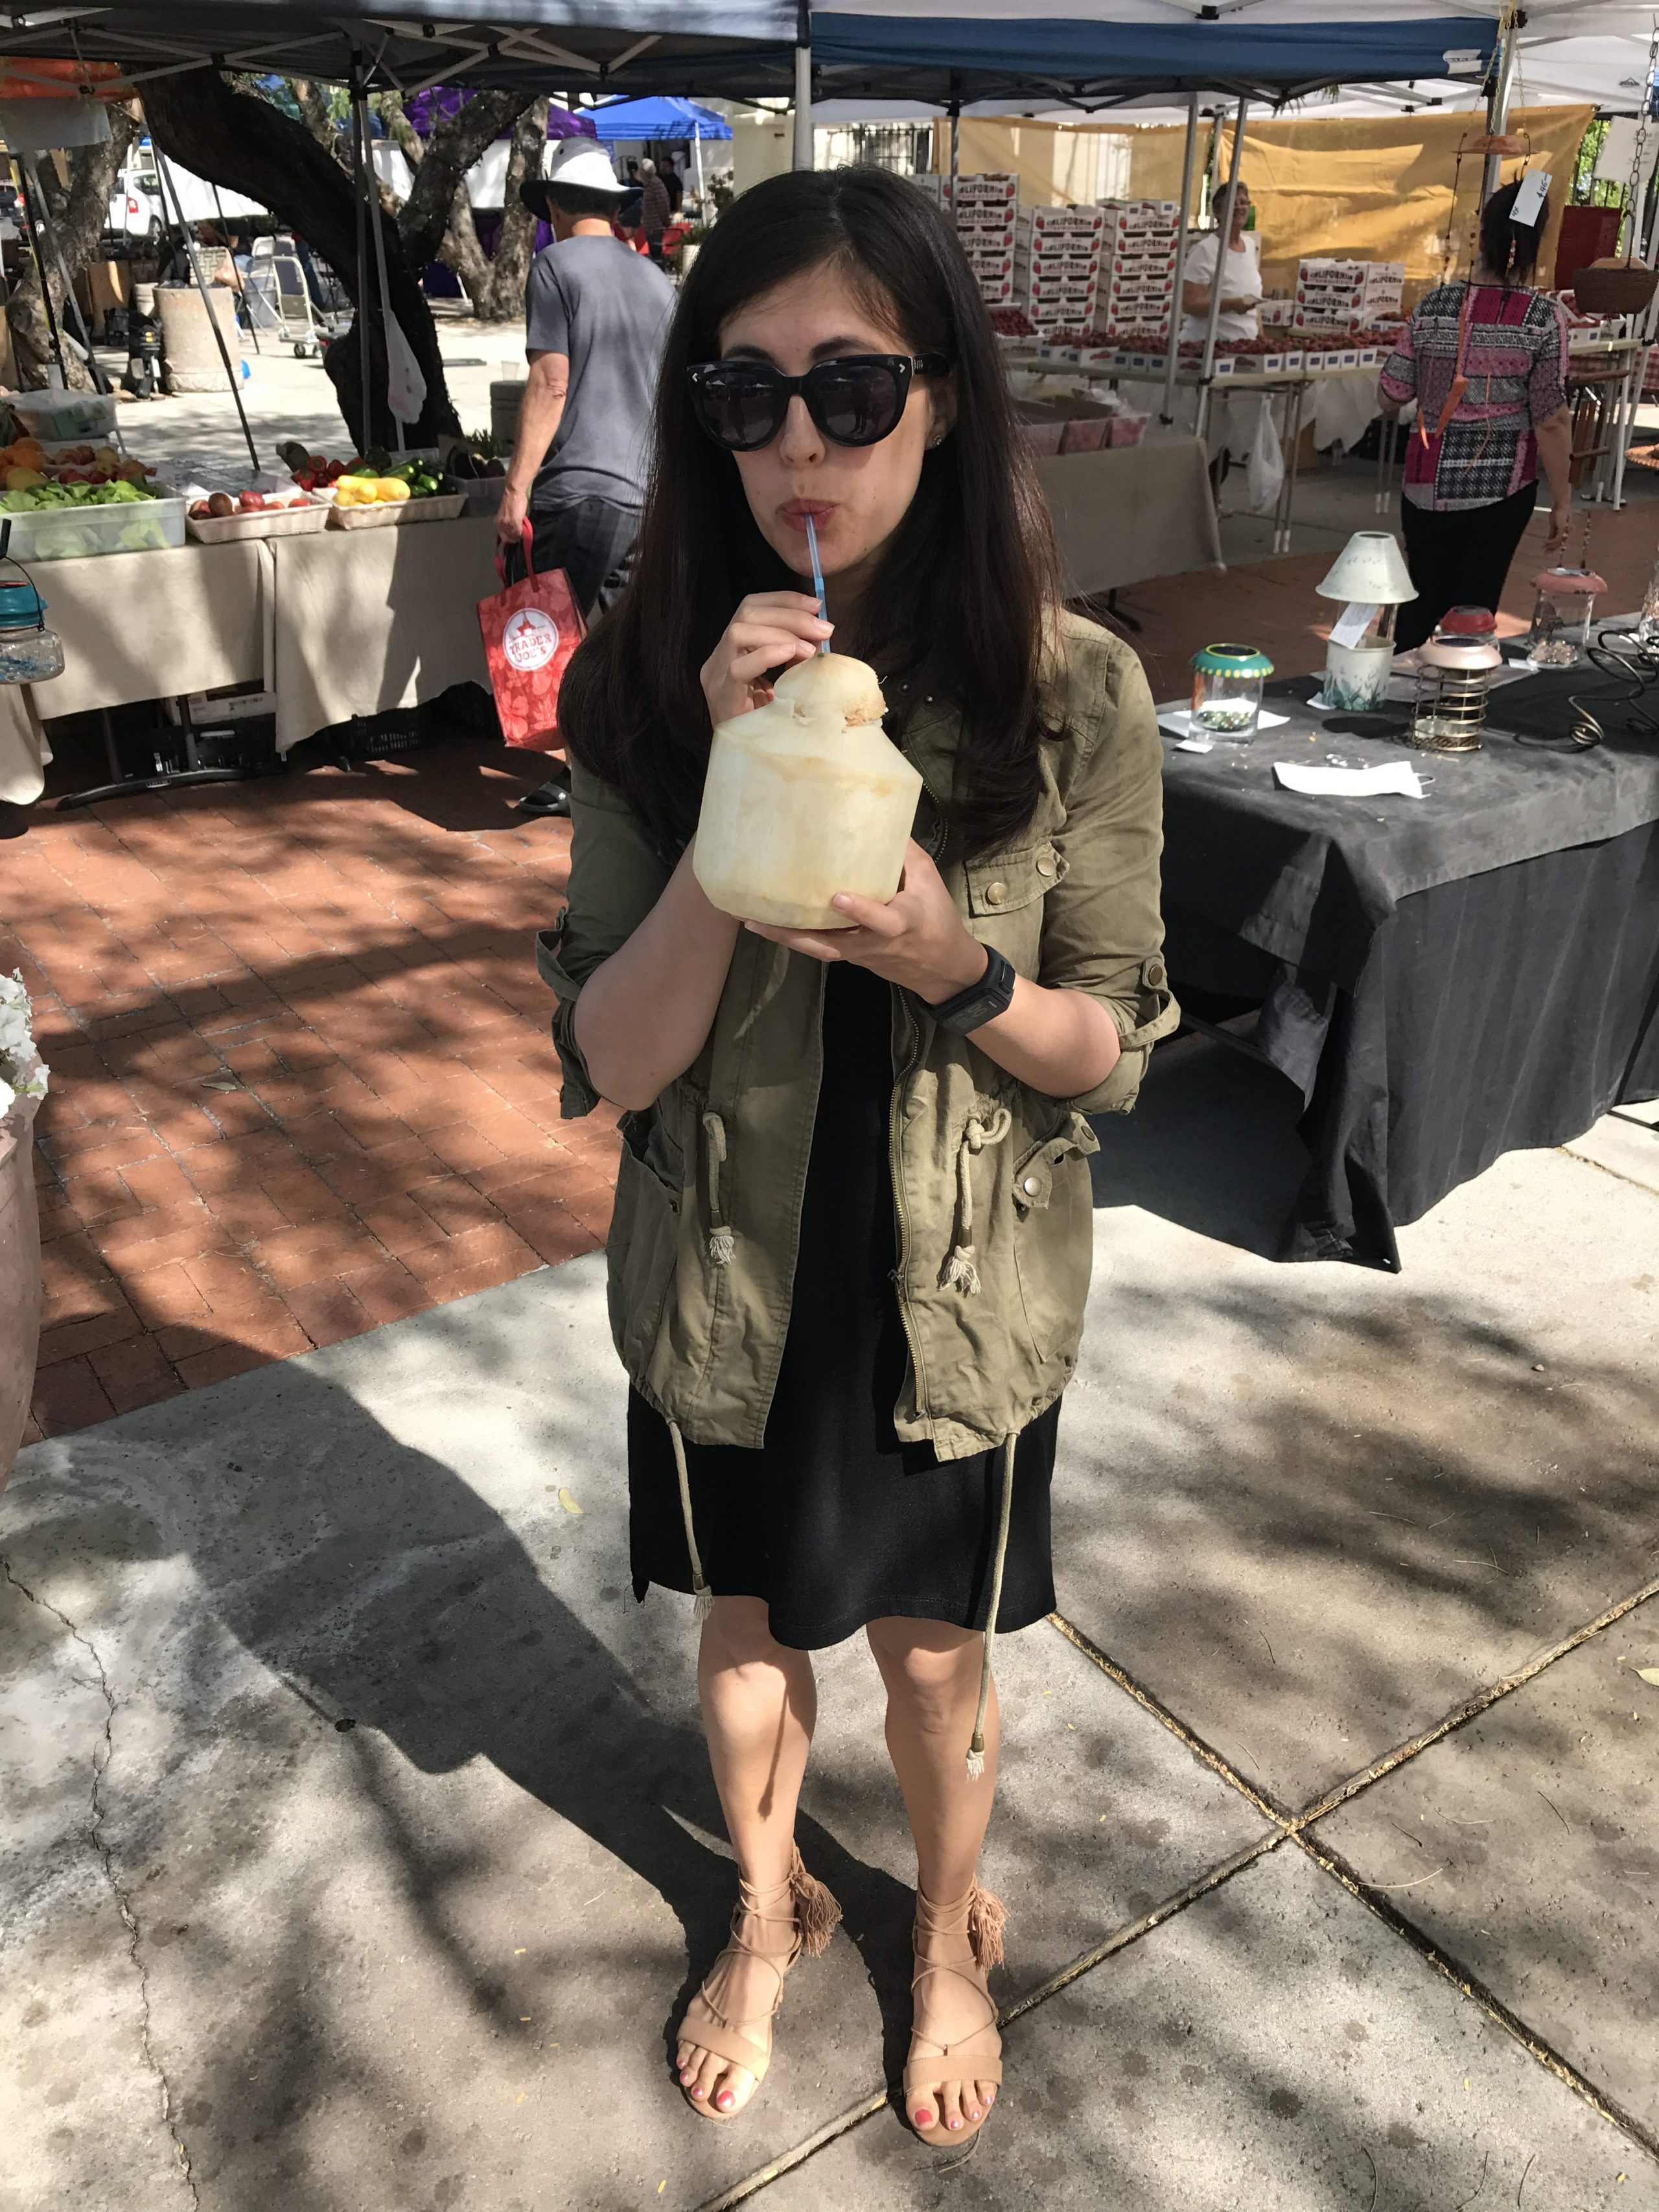 drinking from a coconut